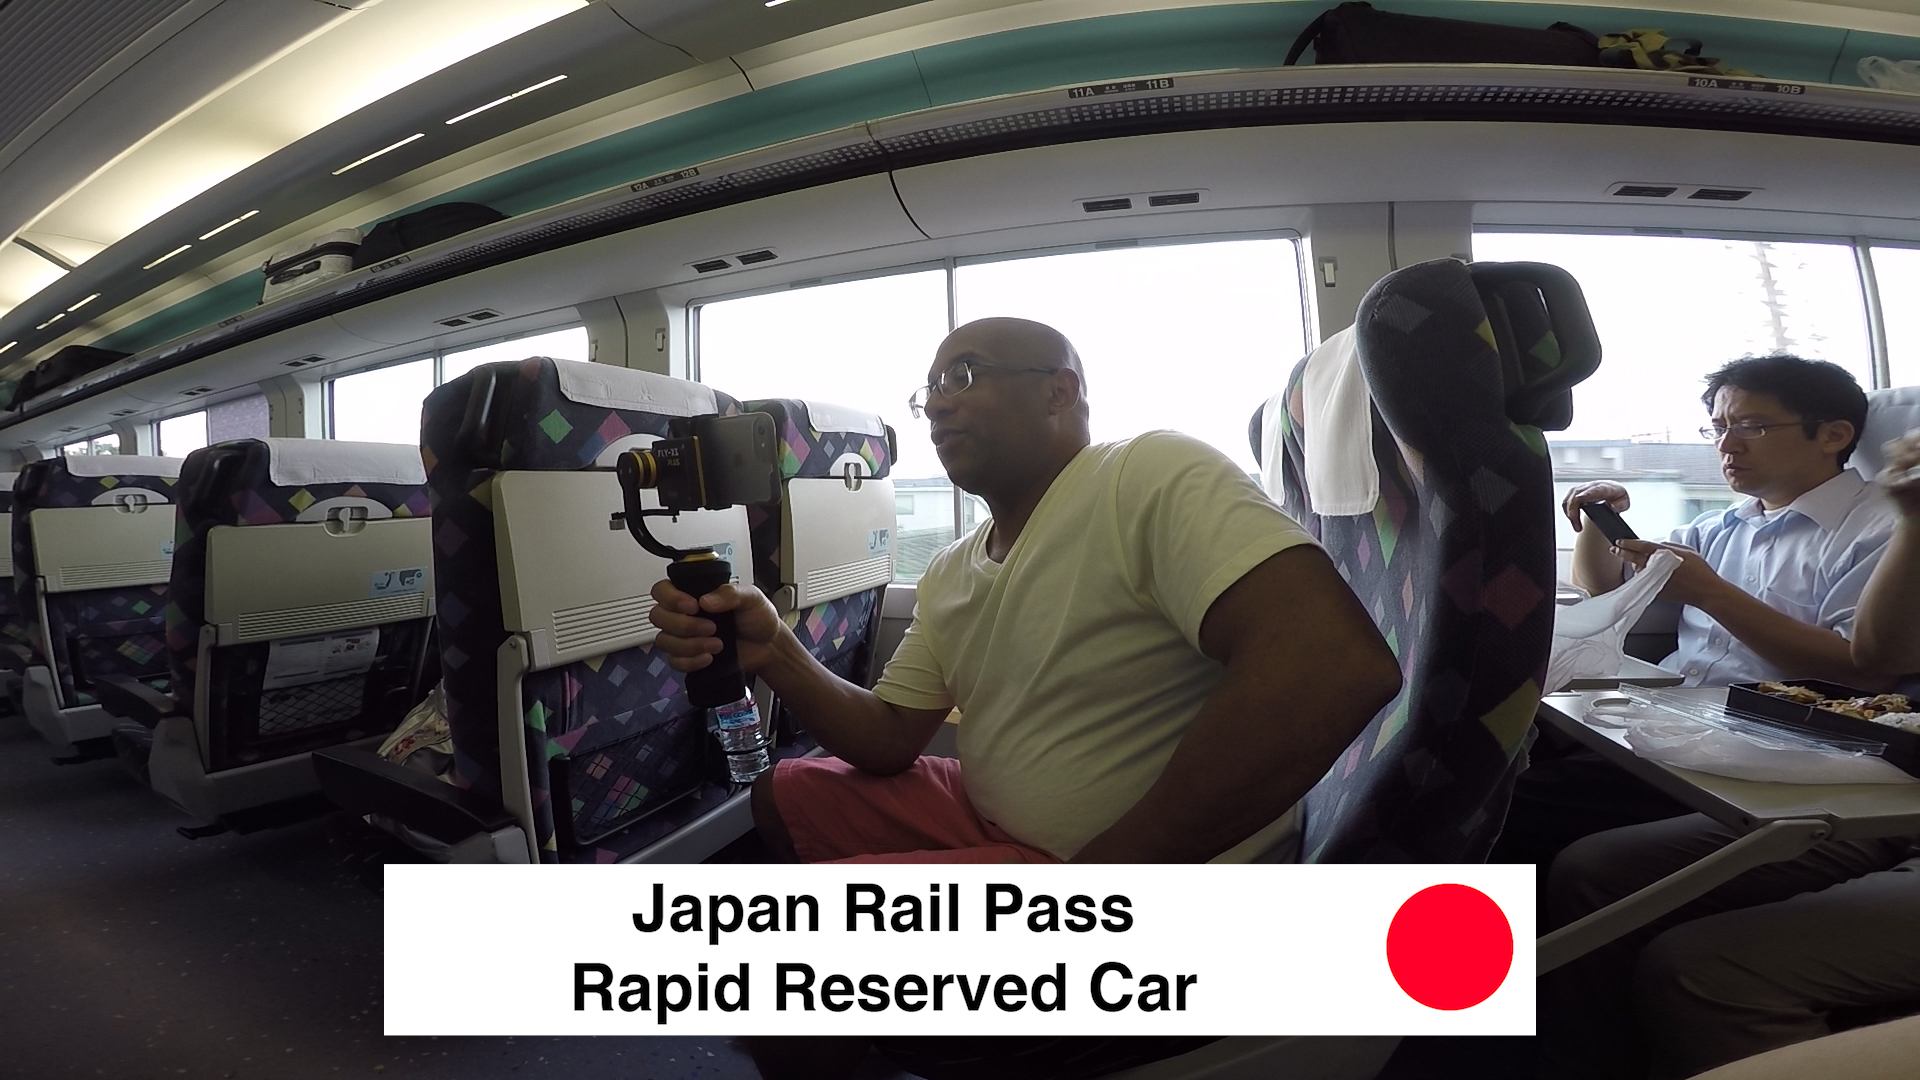 Japan Rail Rapid Reserved Car - Where To Buy Japan Rail Pass How To Use JR Pass In Tokyo. JR Pass Price